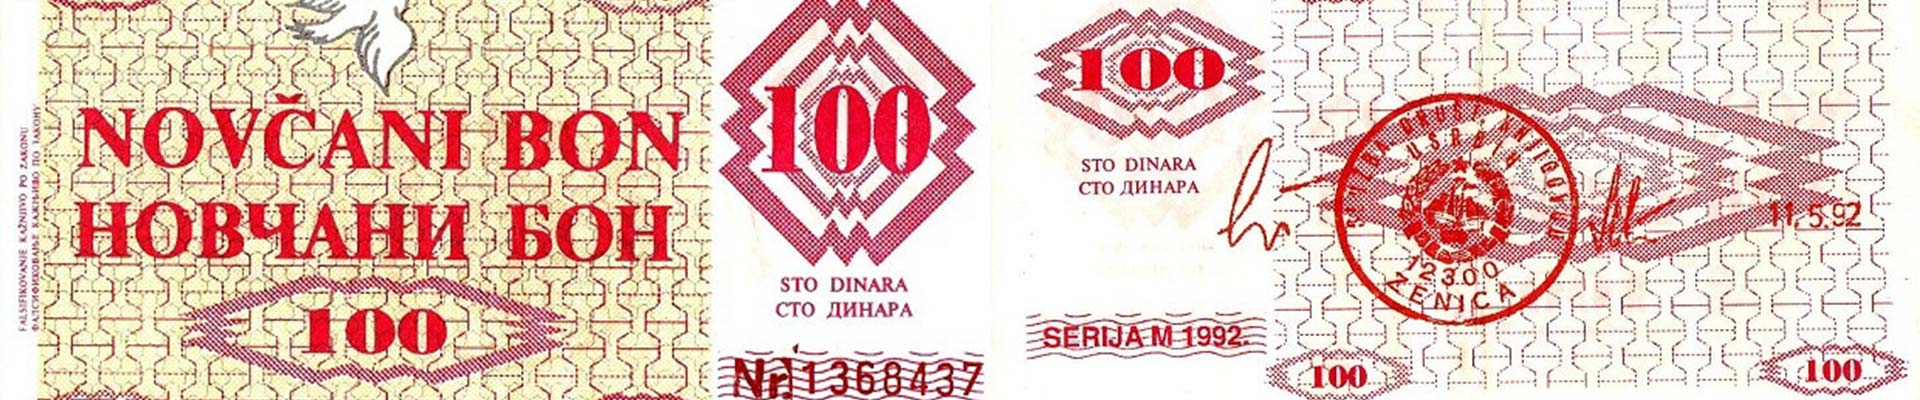 History of and Key Counterfeit Identifiers for Local Provisional Novčani Bon Notes